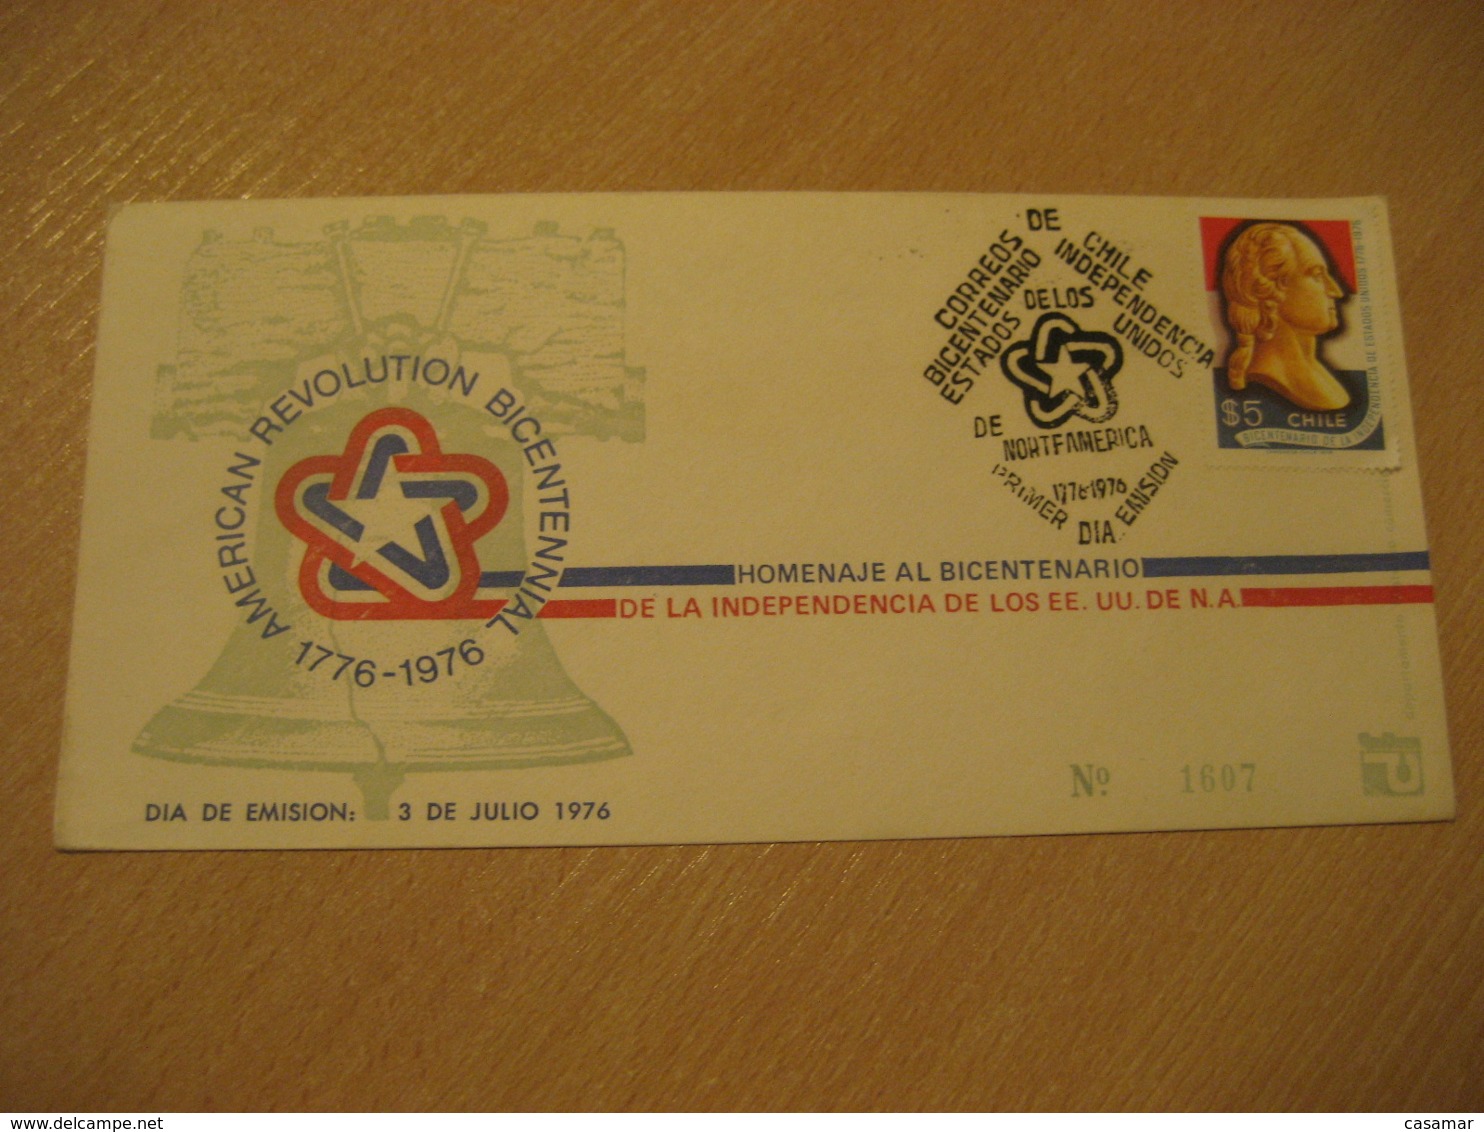 1976 Bicentenario Bicentennial USA Independence FDC Cancel Cover CHILE - Chili